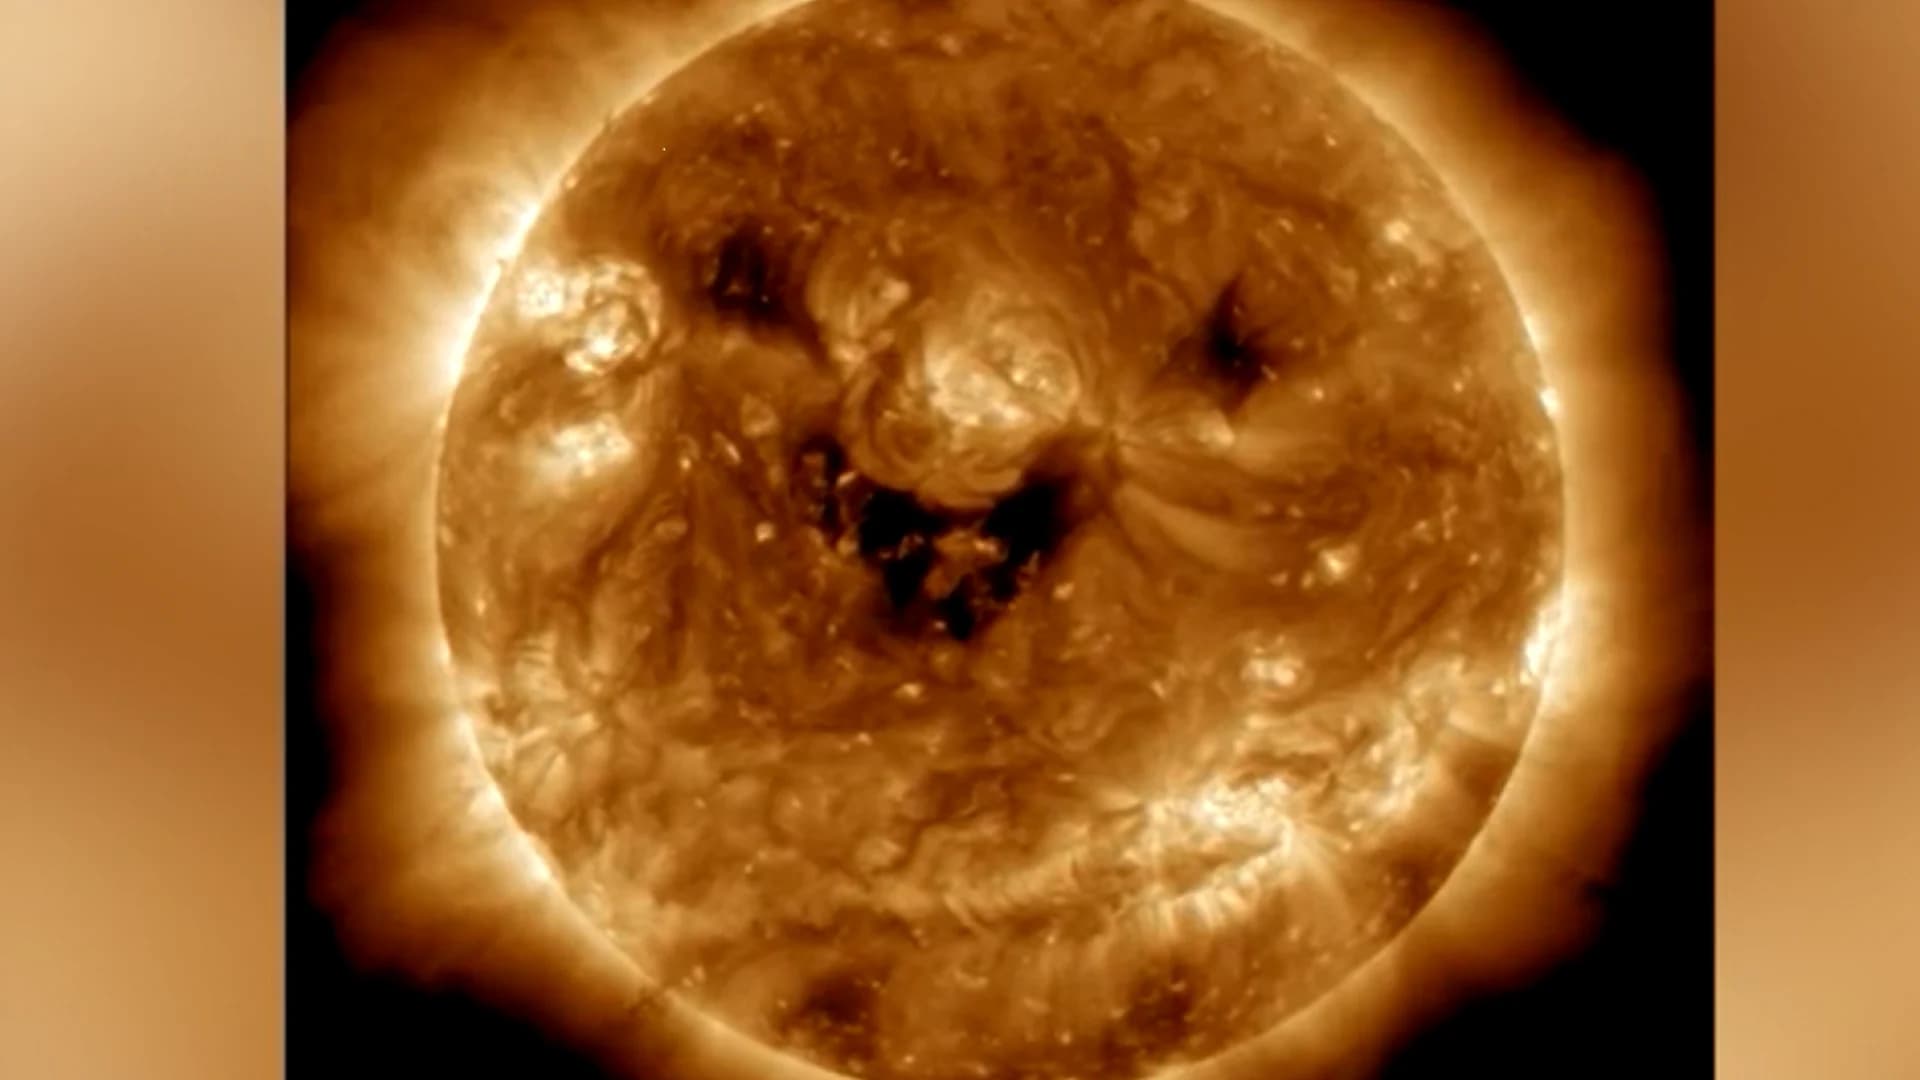 What’s Hot: NASA records image of sun looking like a jack-o'-lantern